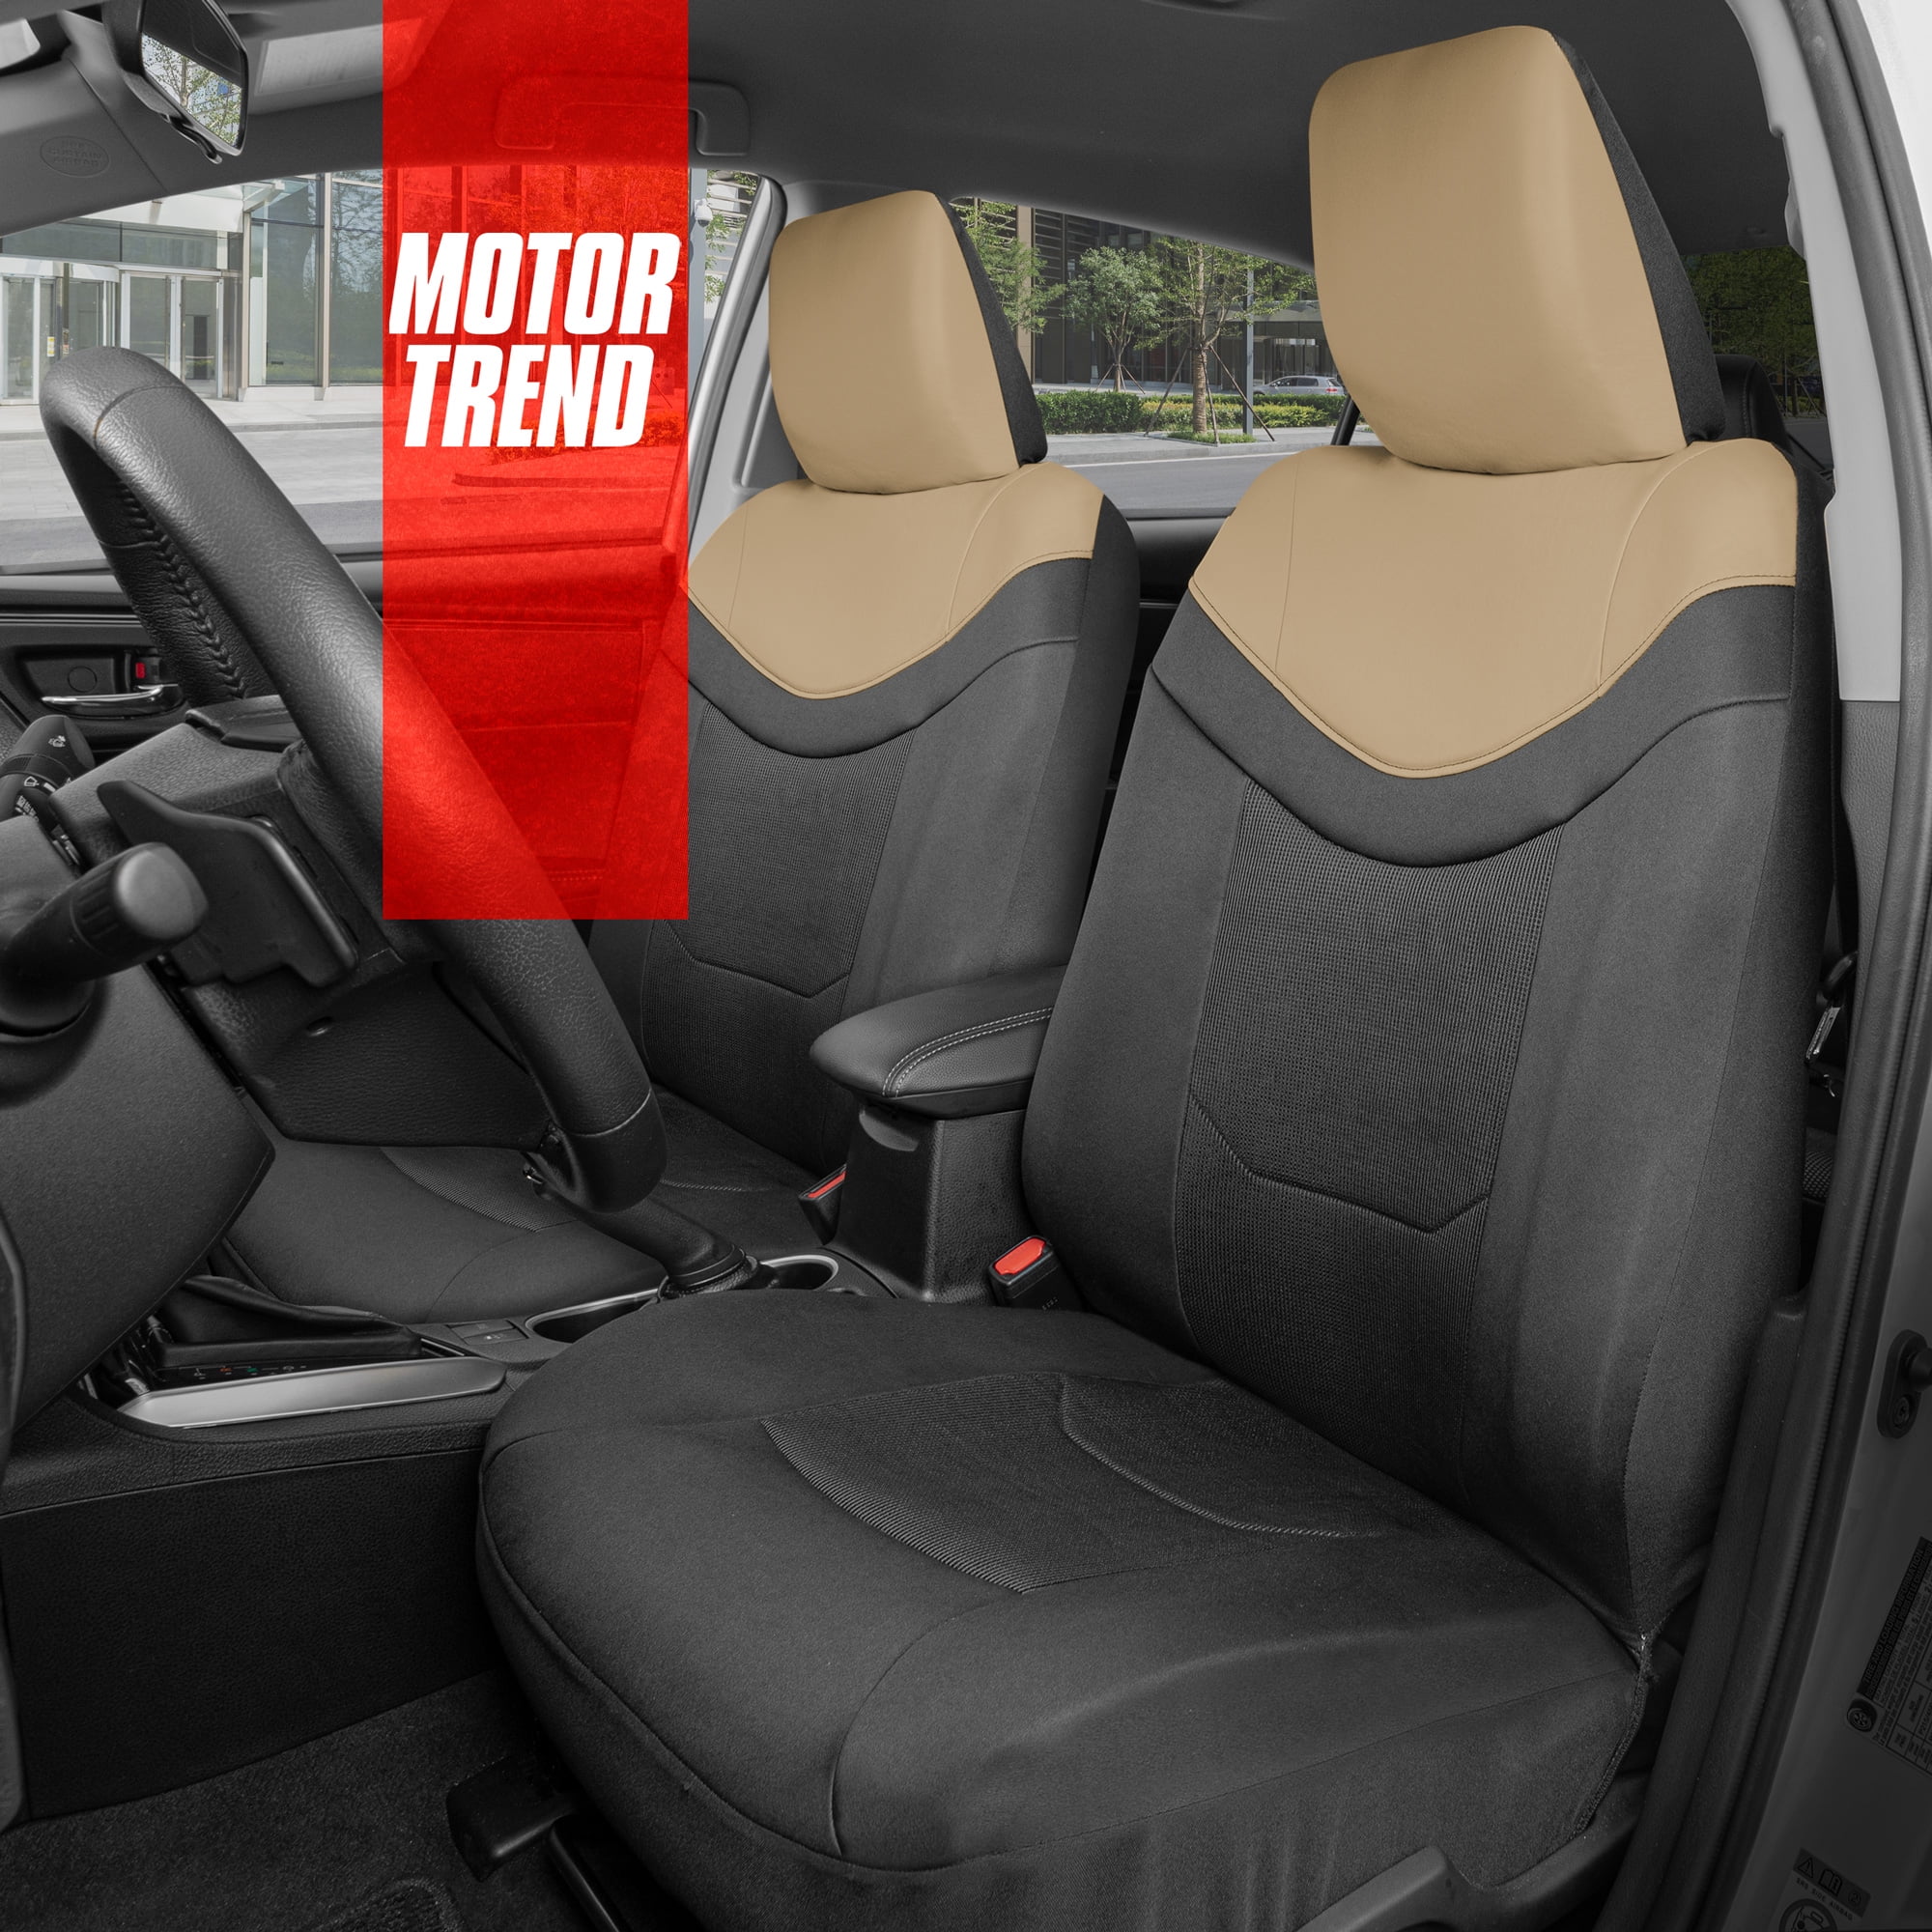 Motor Trend LuxeFit Solid Beige Faux Leather Front Seat Covers for Cars Trucks Suv, 2 Piece Set Padded Car Seat Protectors